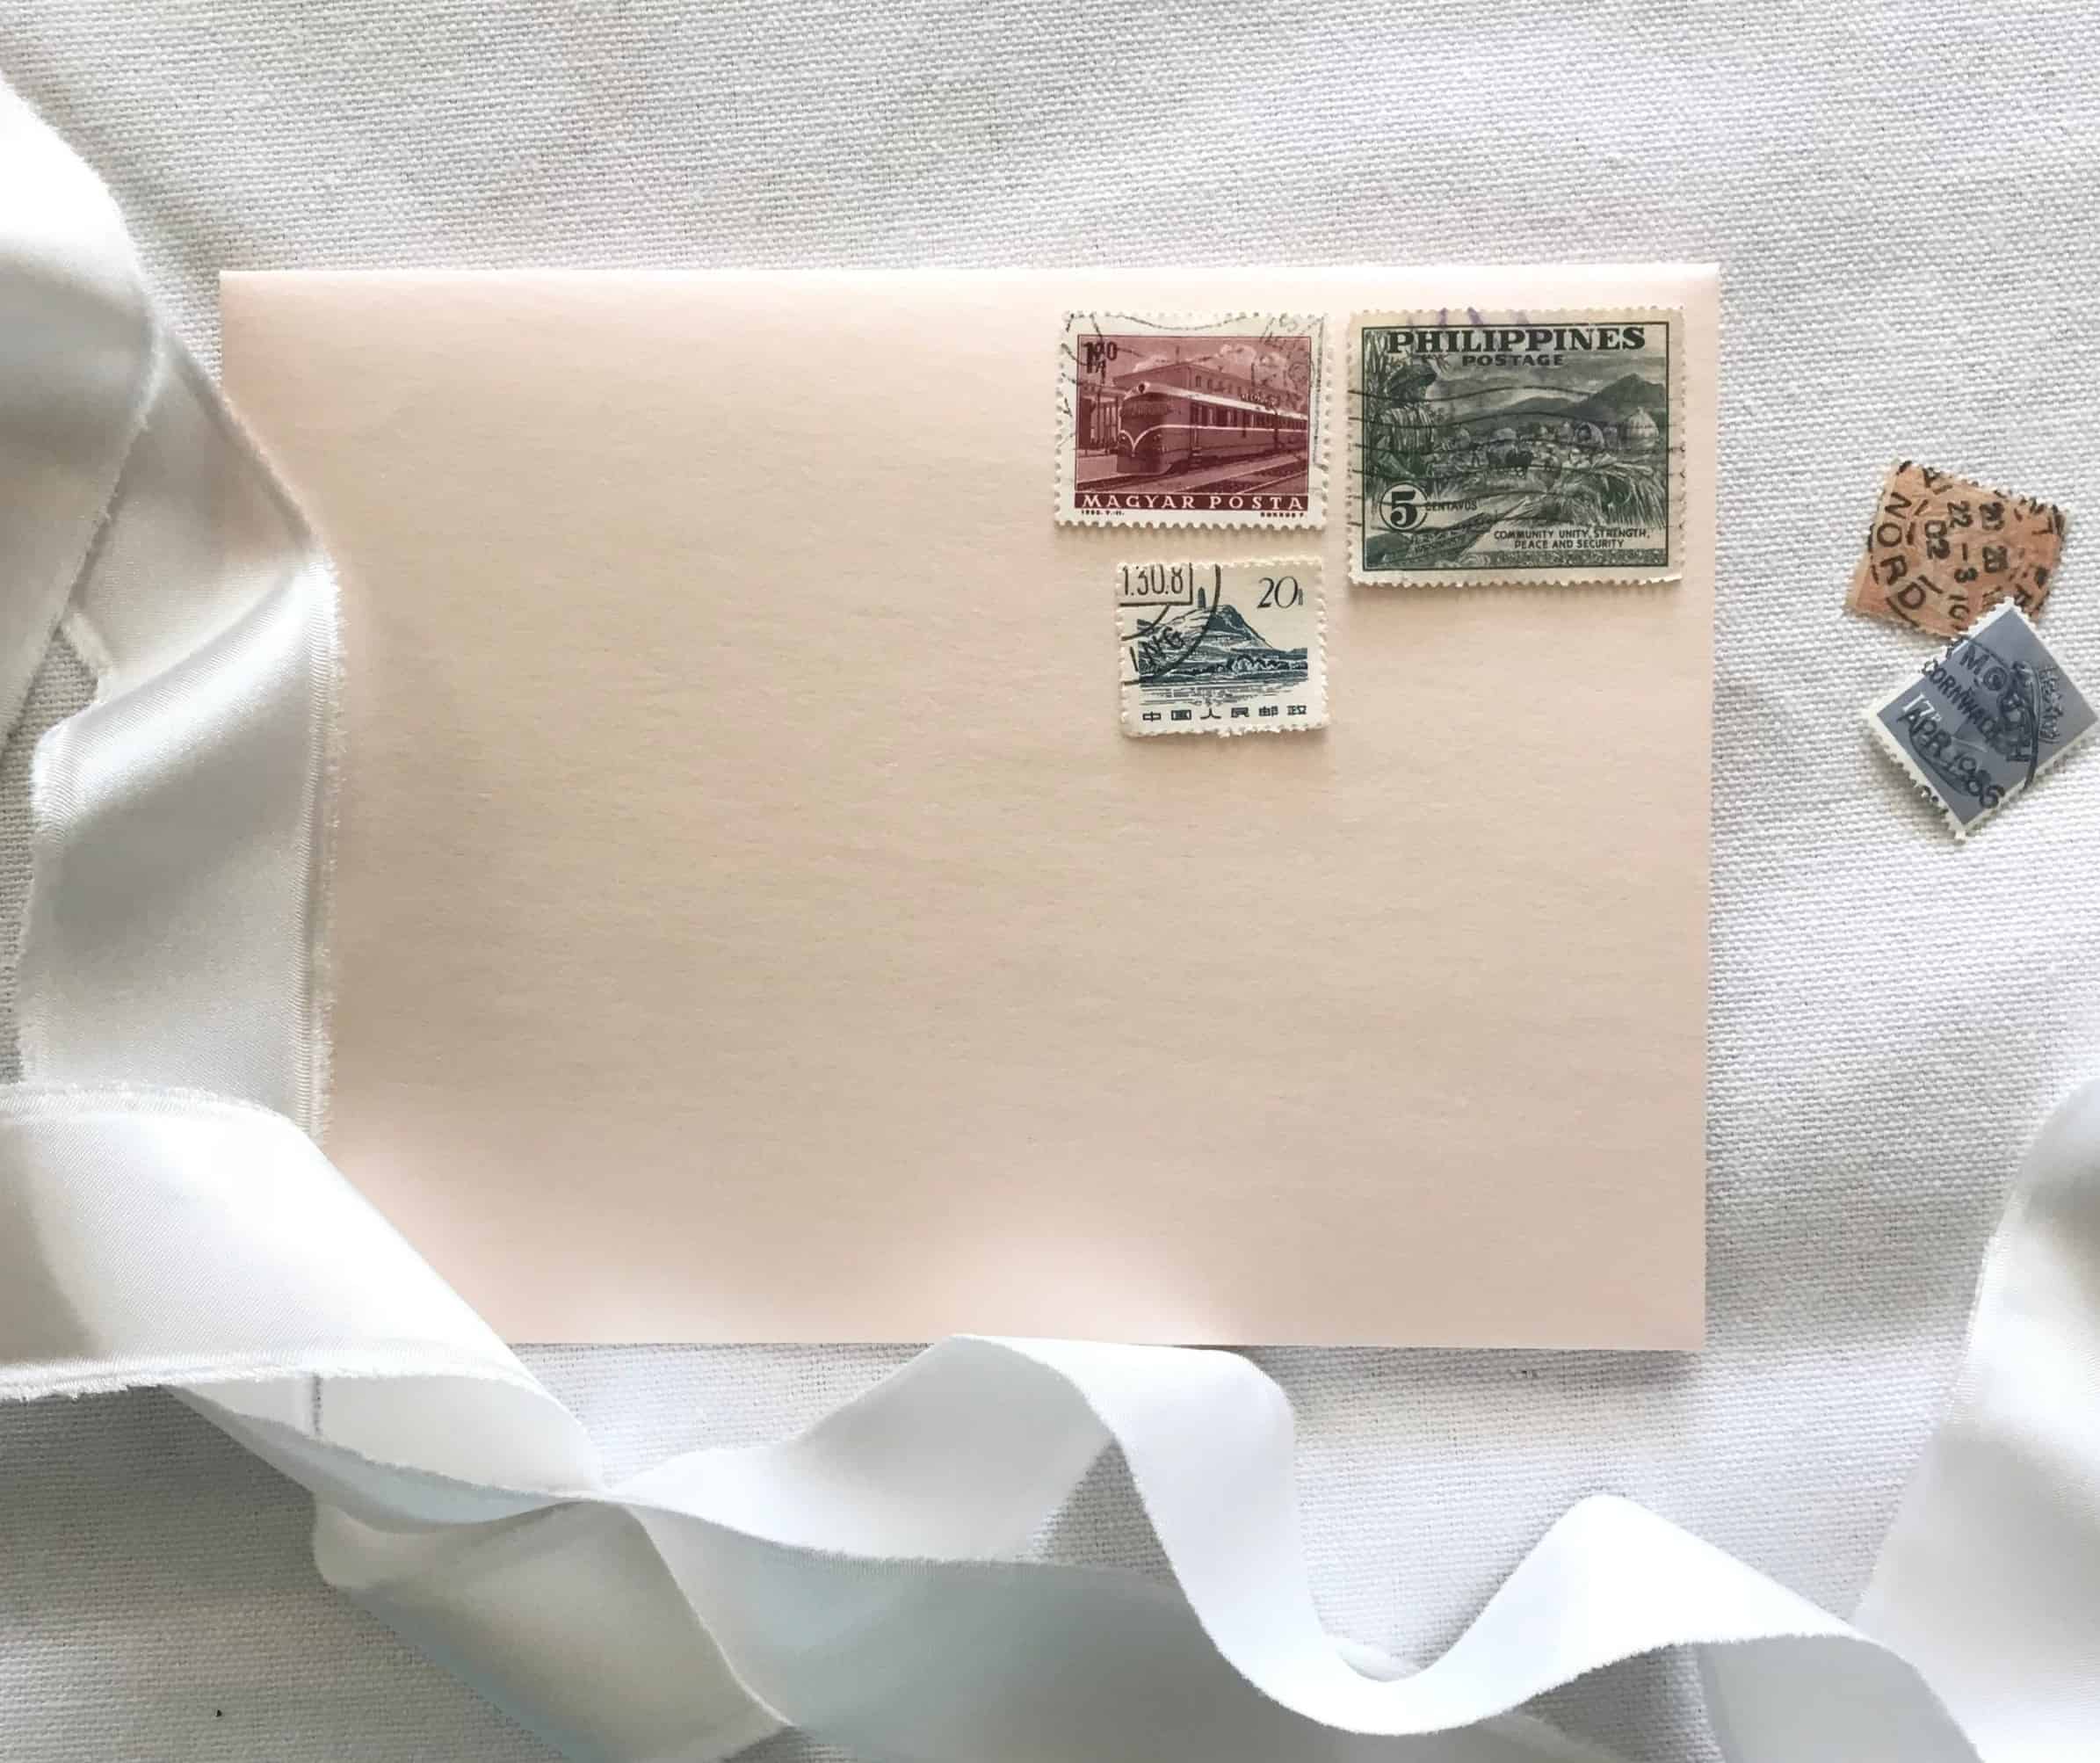 Two Ounce (2 oz.) Stamps for Wedding Invitations